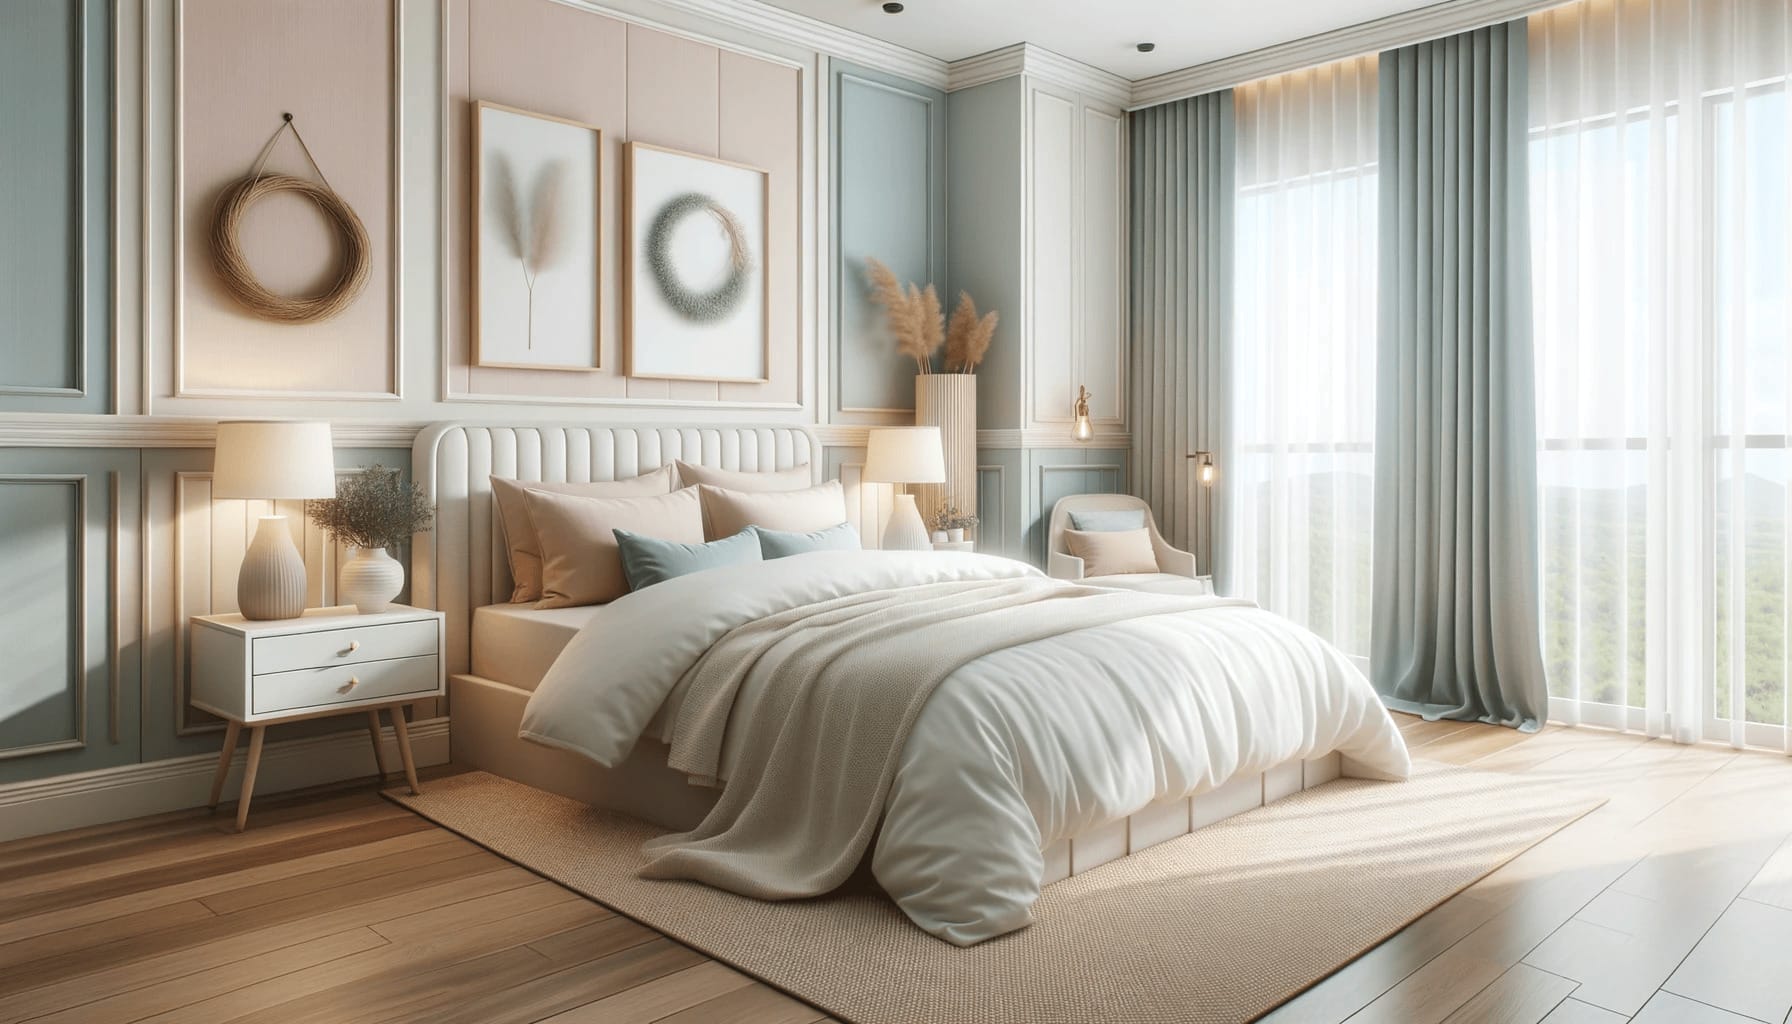 DALL·E 2023 10 17 17.45.33 Photo of a serene bedroom with pastel colors emphasizing comfort and simplicity after a cost effective remodeling